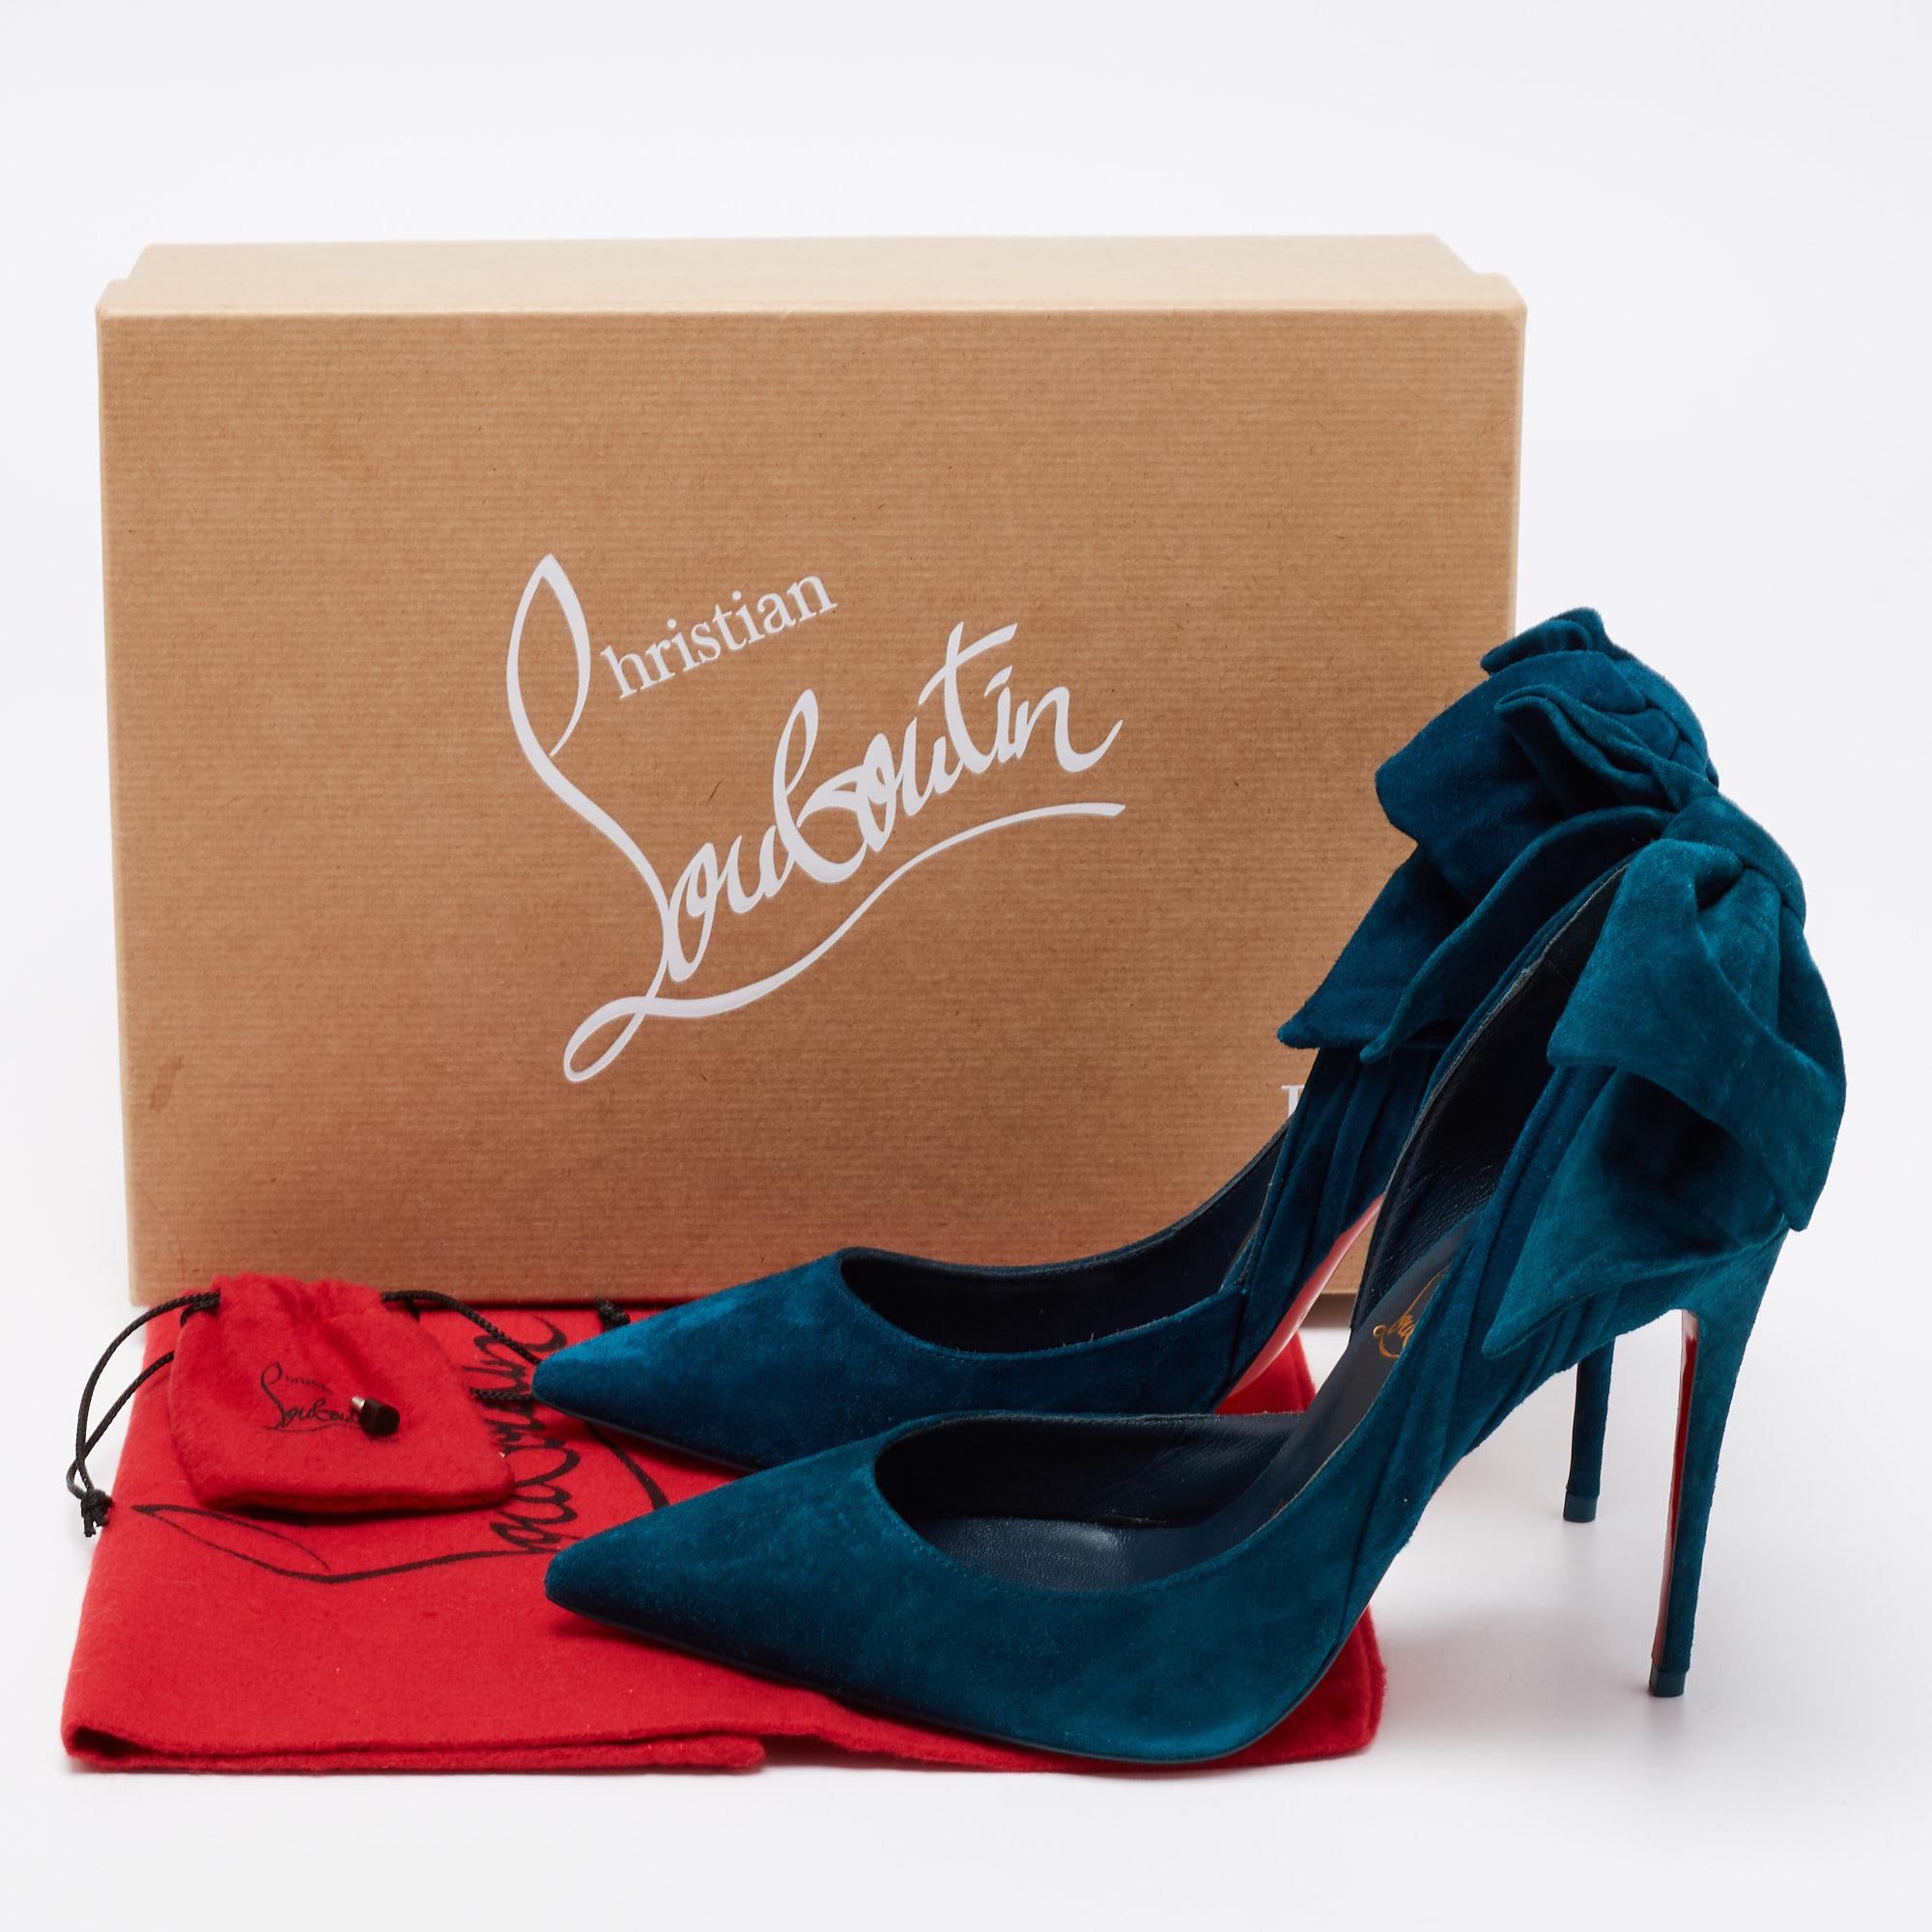 Christian Louboutin Teal Blue Suede Bow Rabakate D'Orsay Pumps Size 37 1